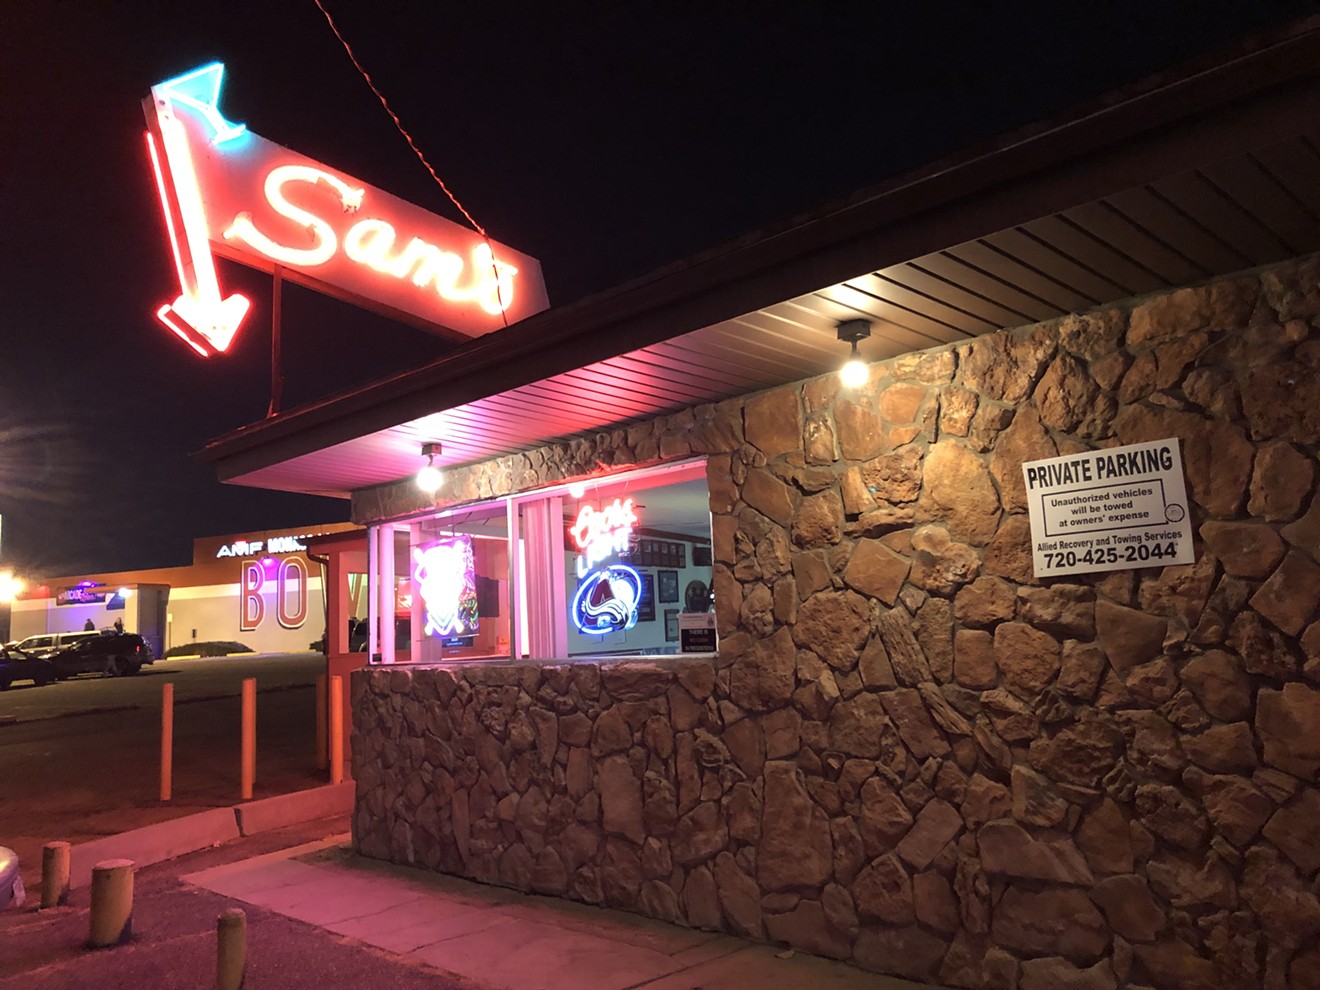 The neon sign at Sam's Bar & Lounge has welcomed neighbors since the 1950s.